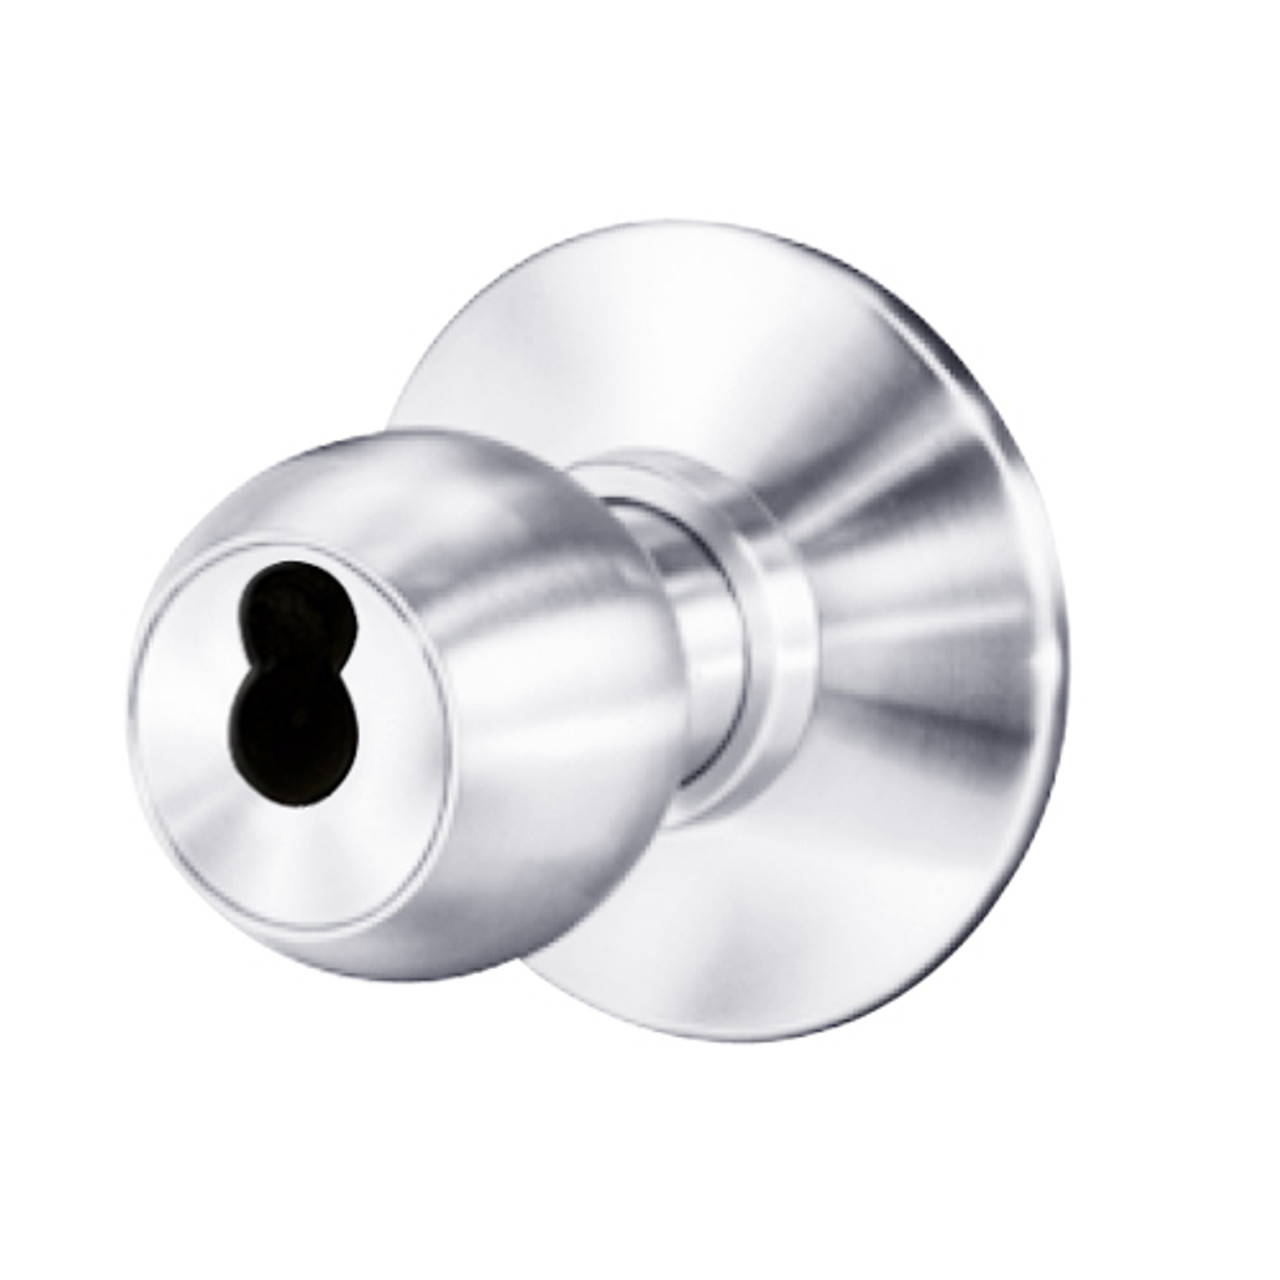 8K37AB4DS3625 Best 8K Series Entrance Heavy Duty Cylindrical Knob Locks with Round Style in Bright Chrome